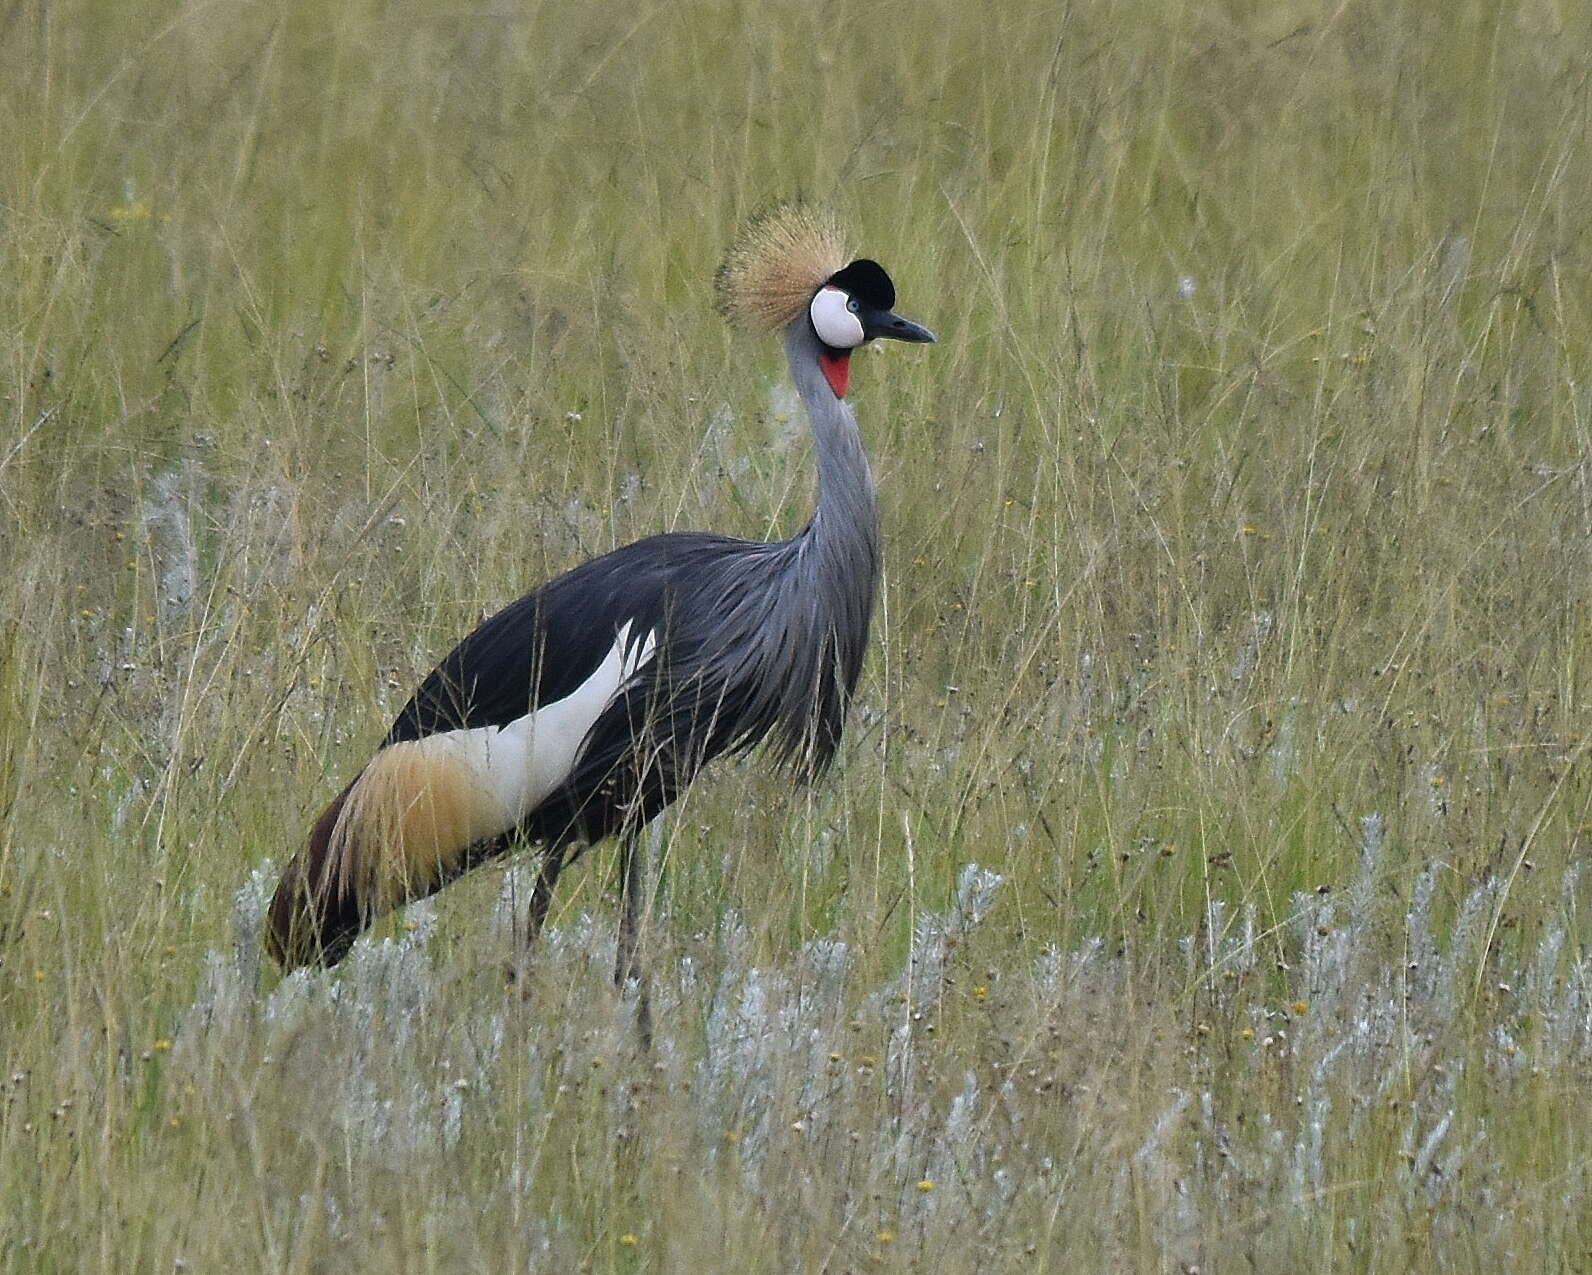 Image of South African Crowned Crane